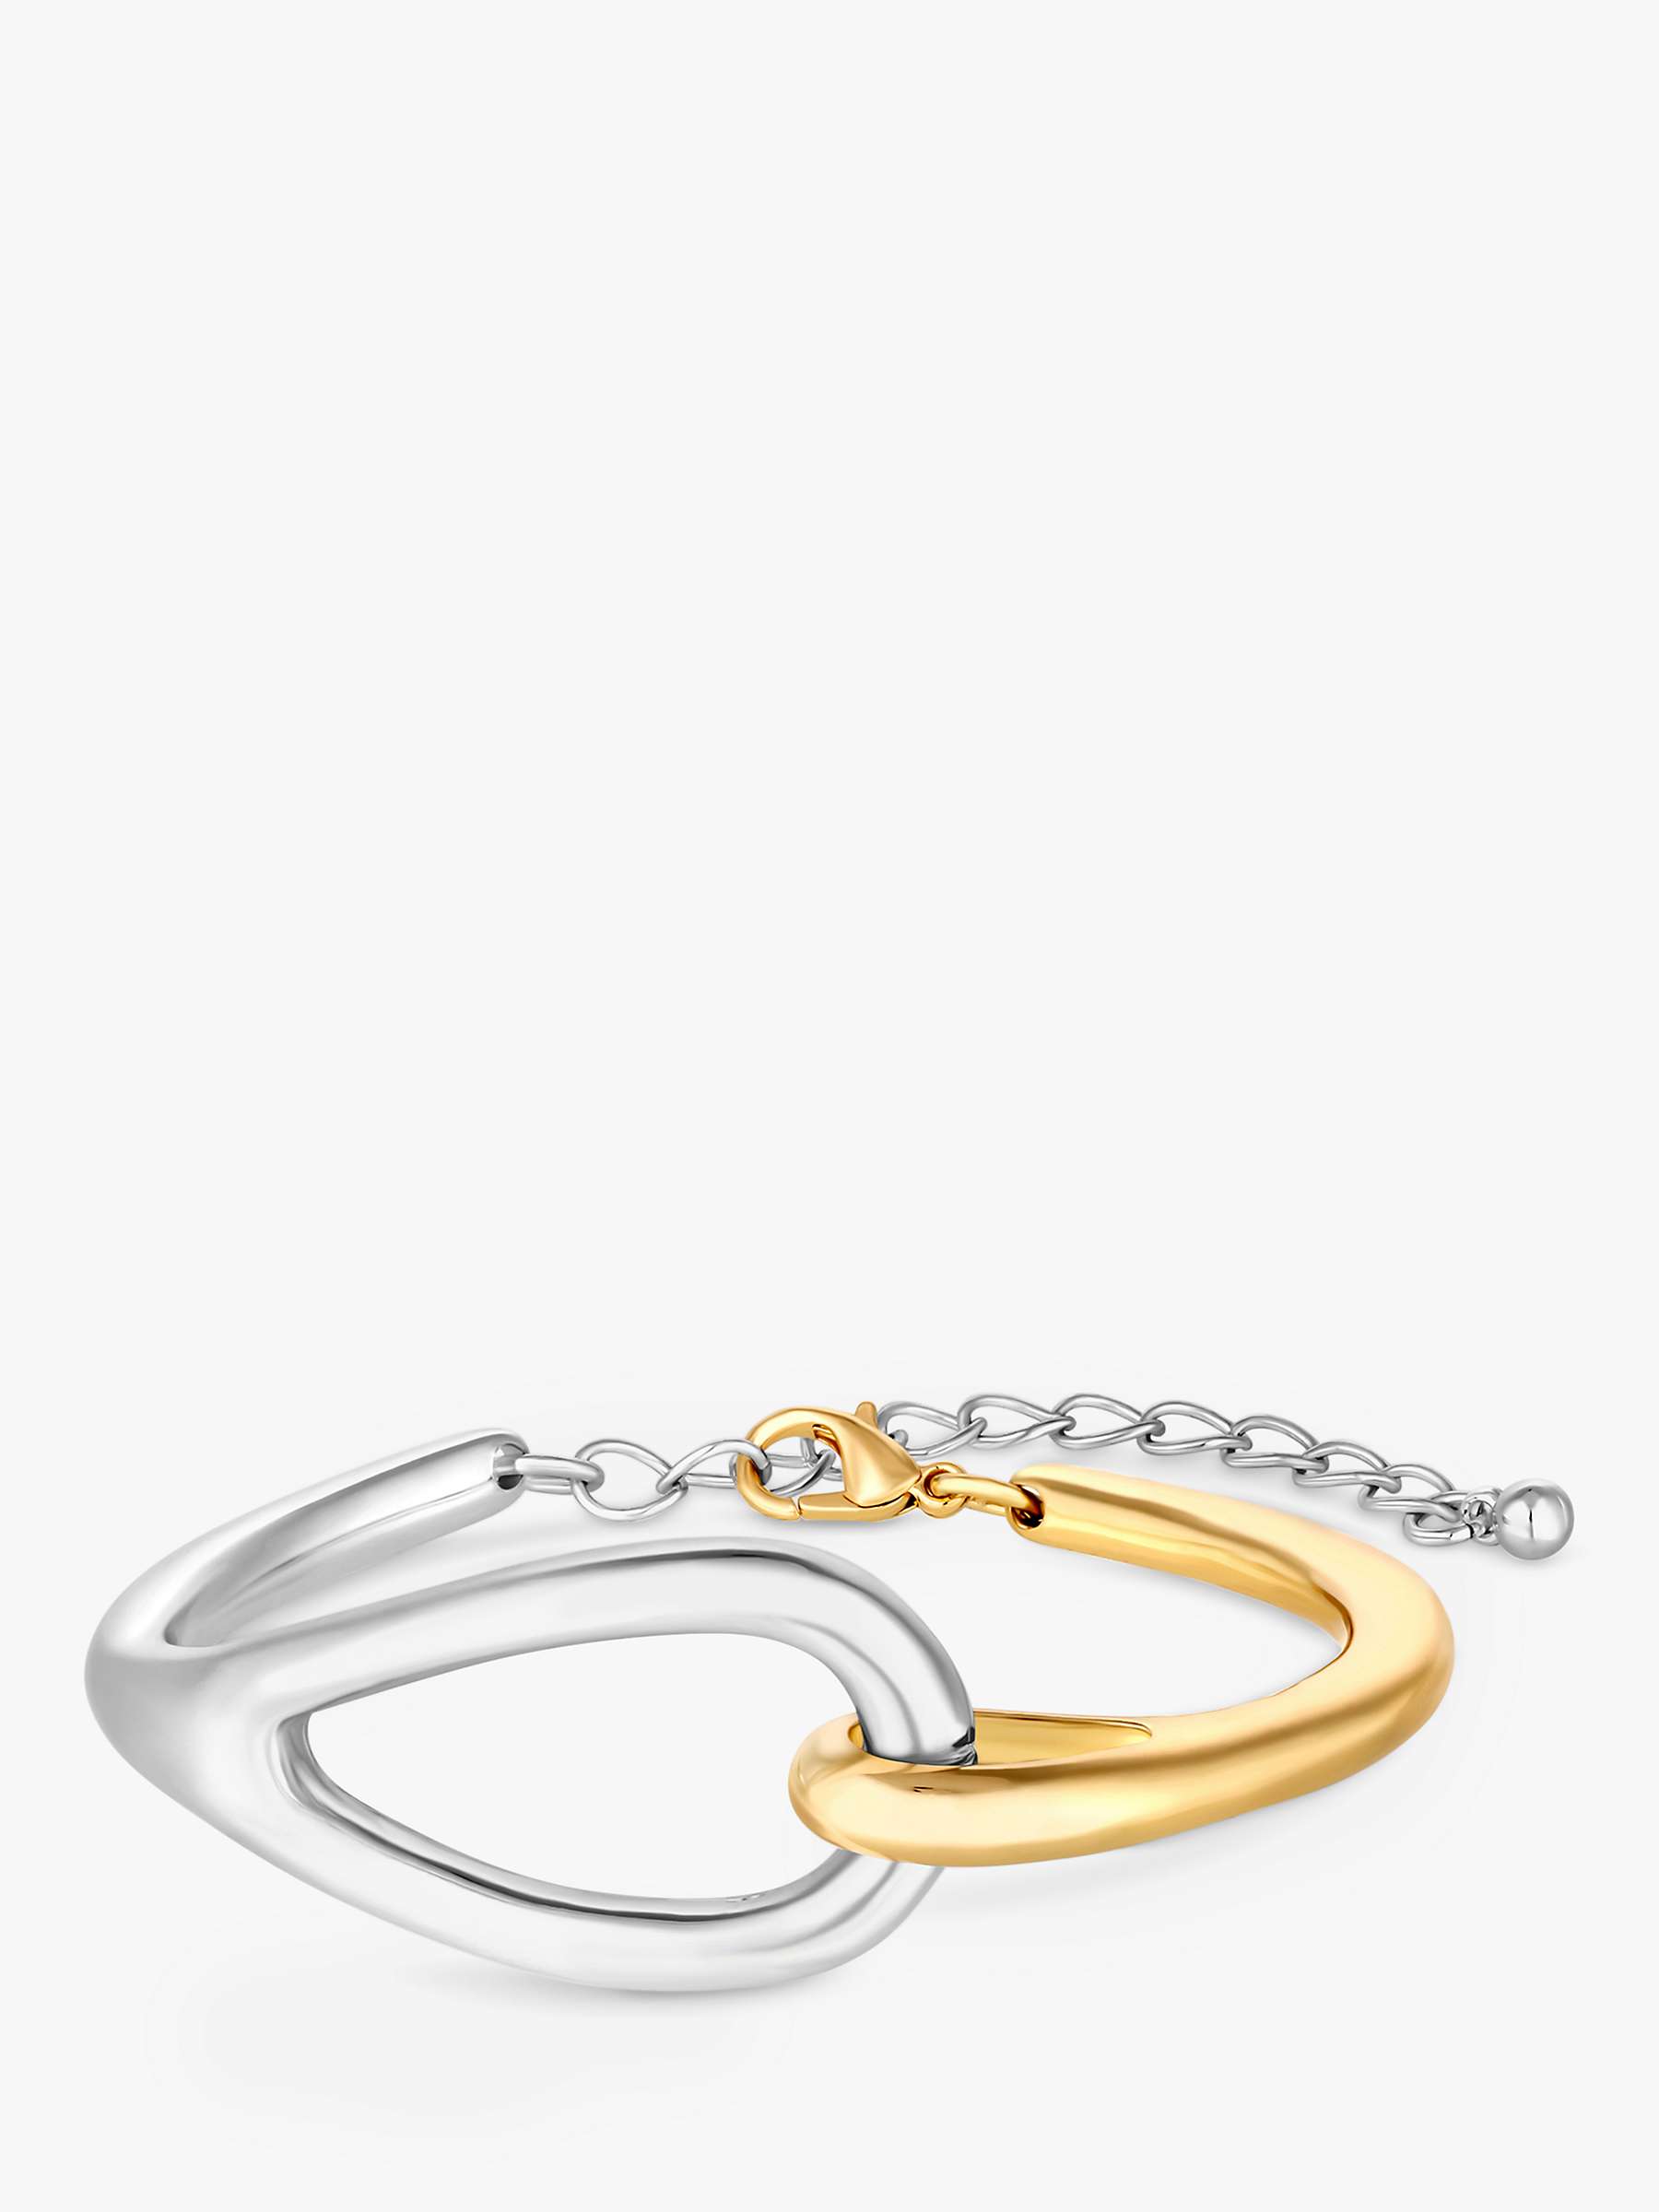 Buy Jon Richard Two Tone Polished Cuff, Silver/Gold Online at johnlewis.com